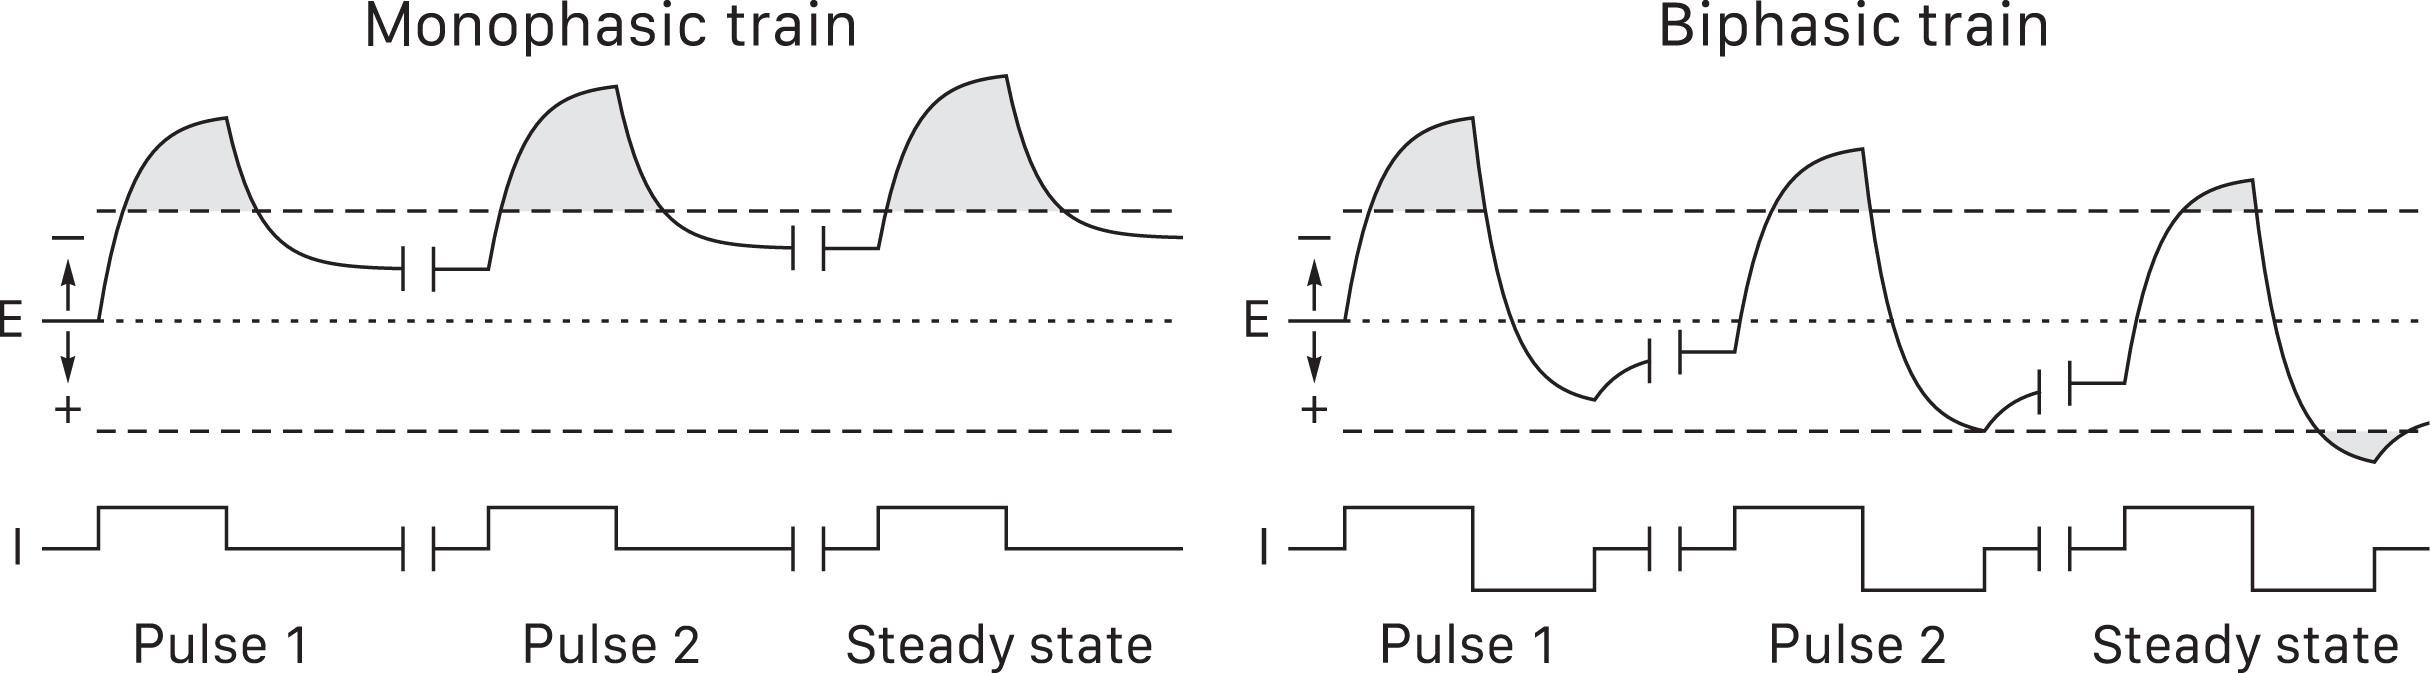 Figure 41.5, Monophasic and biphasic pulse trains. Hazardous faradic charge transfer (gray) begins when a pulse moves electrode potential from equilibrium ( dotted line ) to beyond capacitive range ( dashed lines ). Left panel: cathodal monophasic trains shift the prepulse electrode potential negative until a steady state with mostly faradic injection. Right panel: charge-balanced biphasic trains shift the prepulse potential positive until a steady state with mainly safe capacitive transfer and small equal and opposite faradic transfers during stimulus and reversal phases. E , electrode potential; I , current.